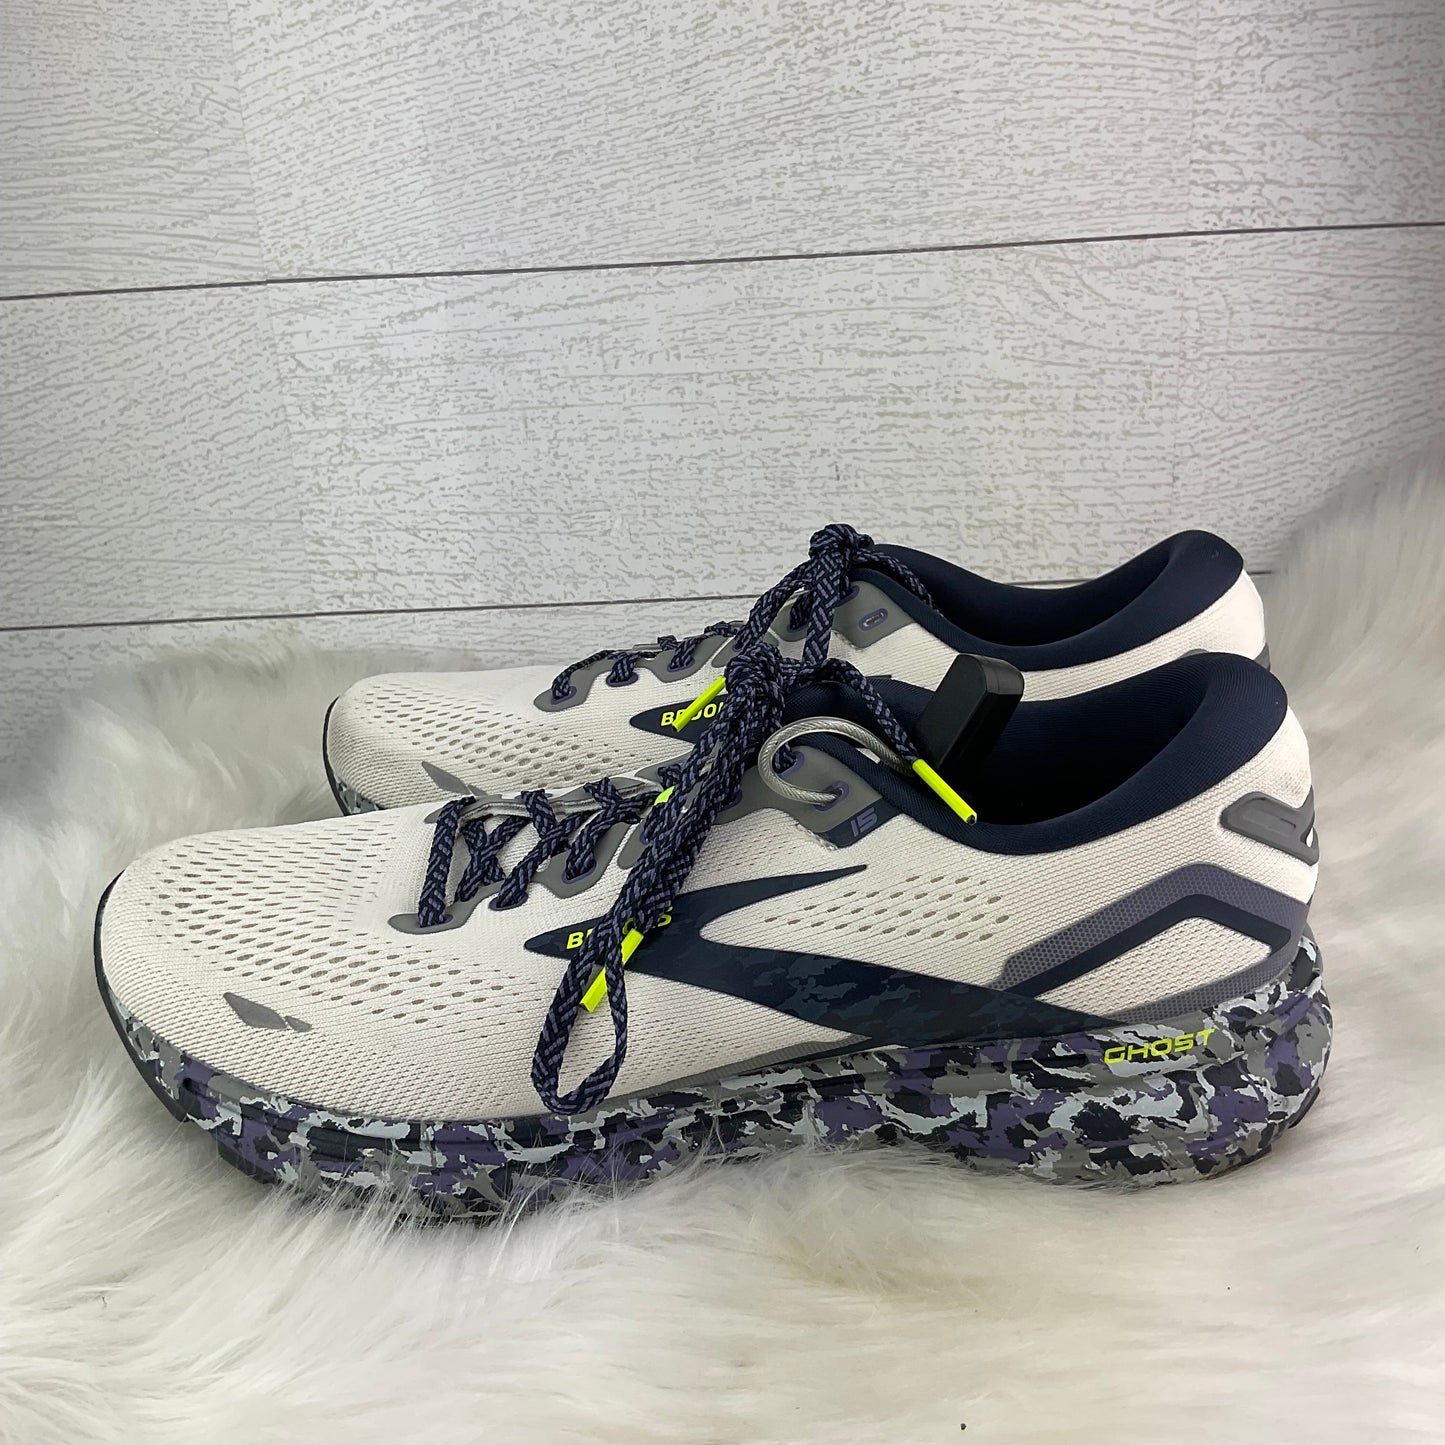 Camouflage Print Shoes Athletic Brooks, Size 9.5